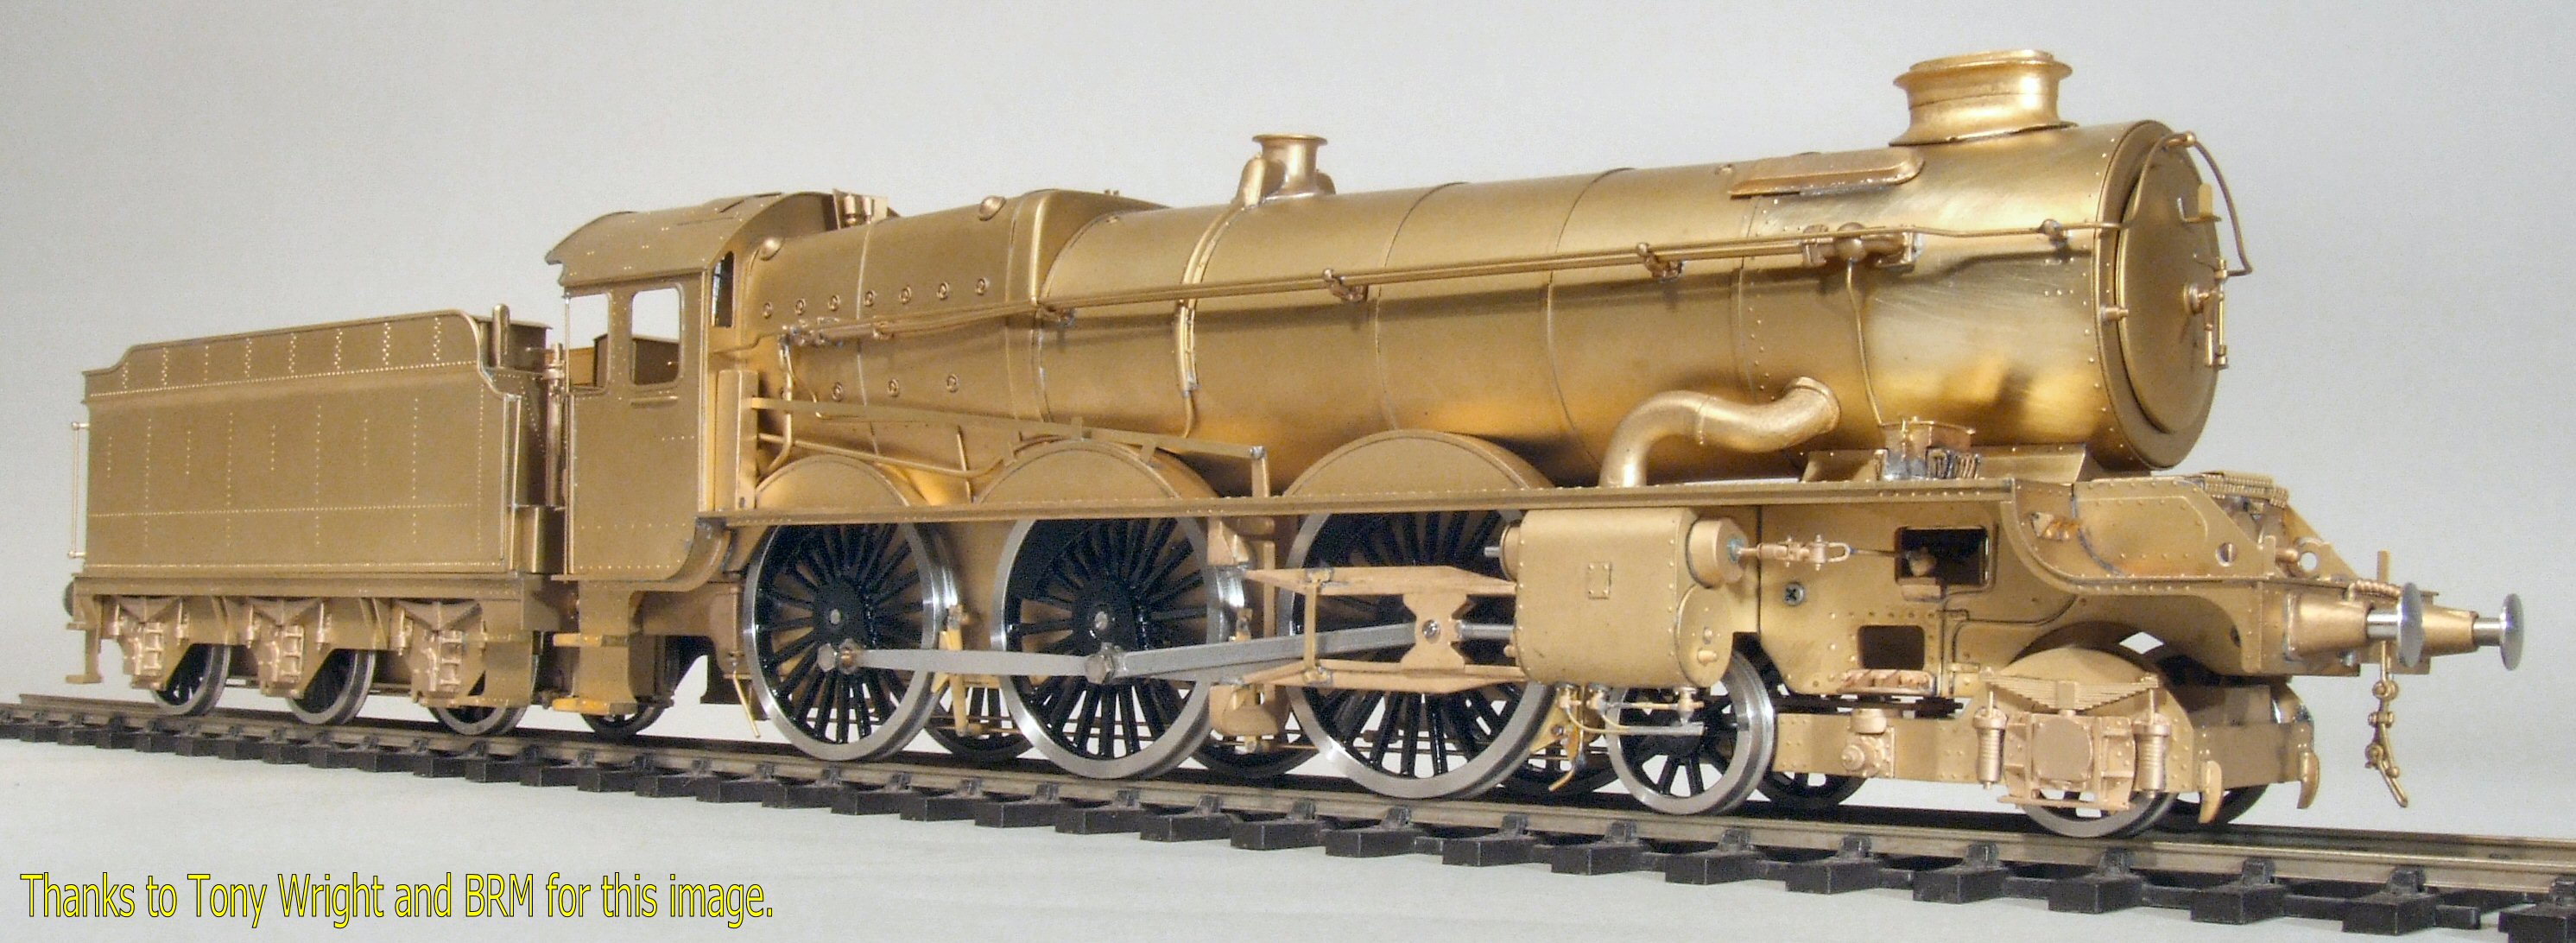 First image of a production King, this one has been finished as King Charles II in 1959 condition